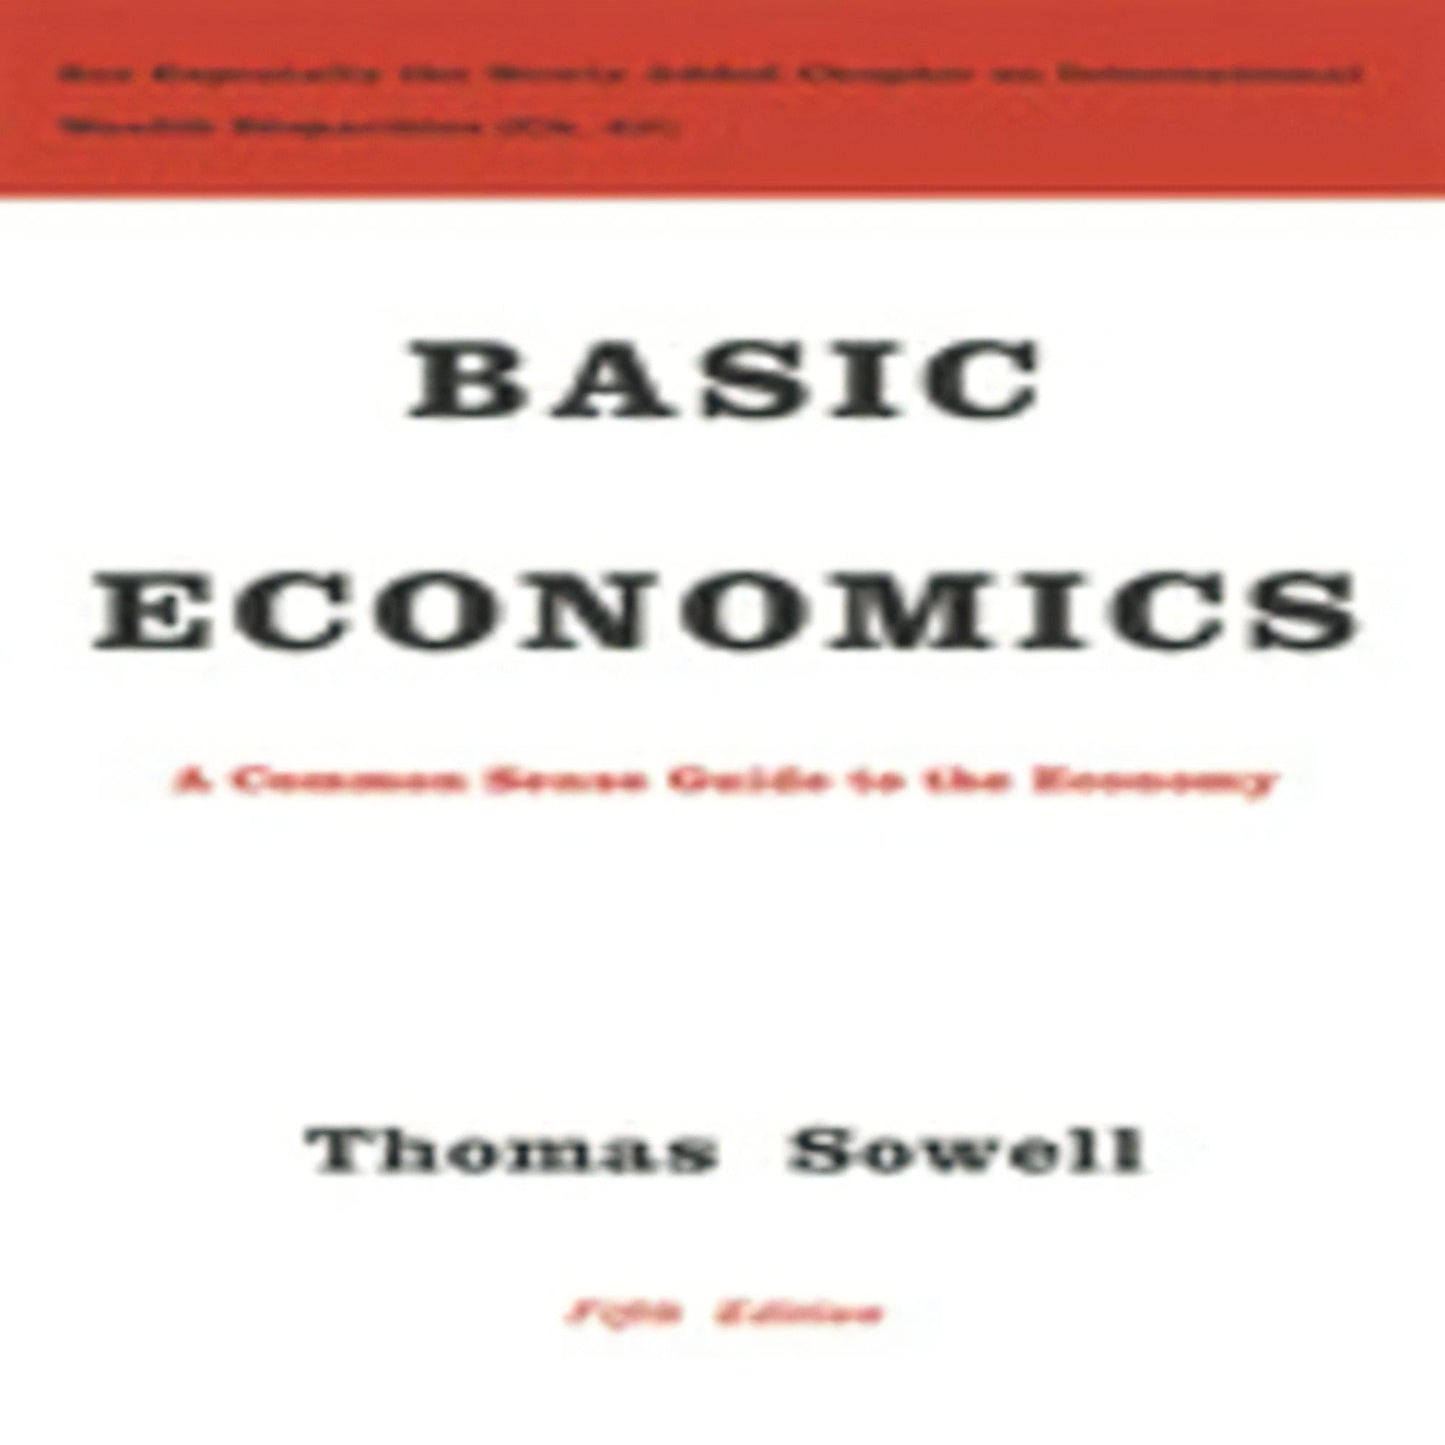 Basic Economics: A Common Sense Guide to the Economy (5TH ed.)760-050823-9780465060733DPGBOOKSTORE.COM. Today's Bestsellers.